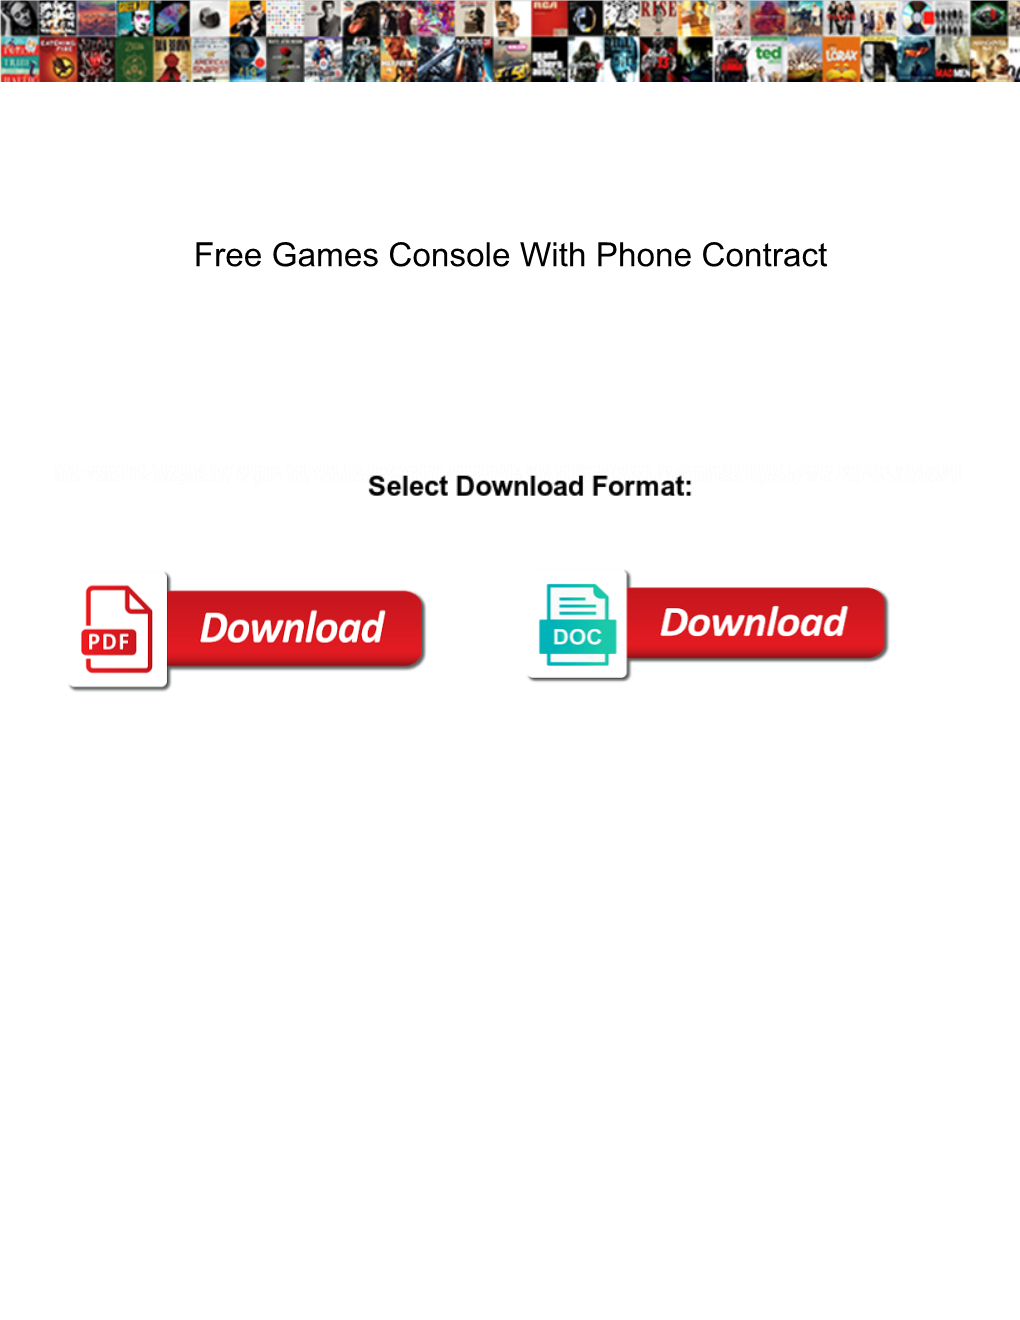 Free Games Console with Phone Contract